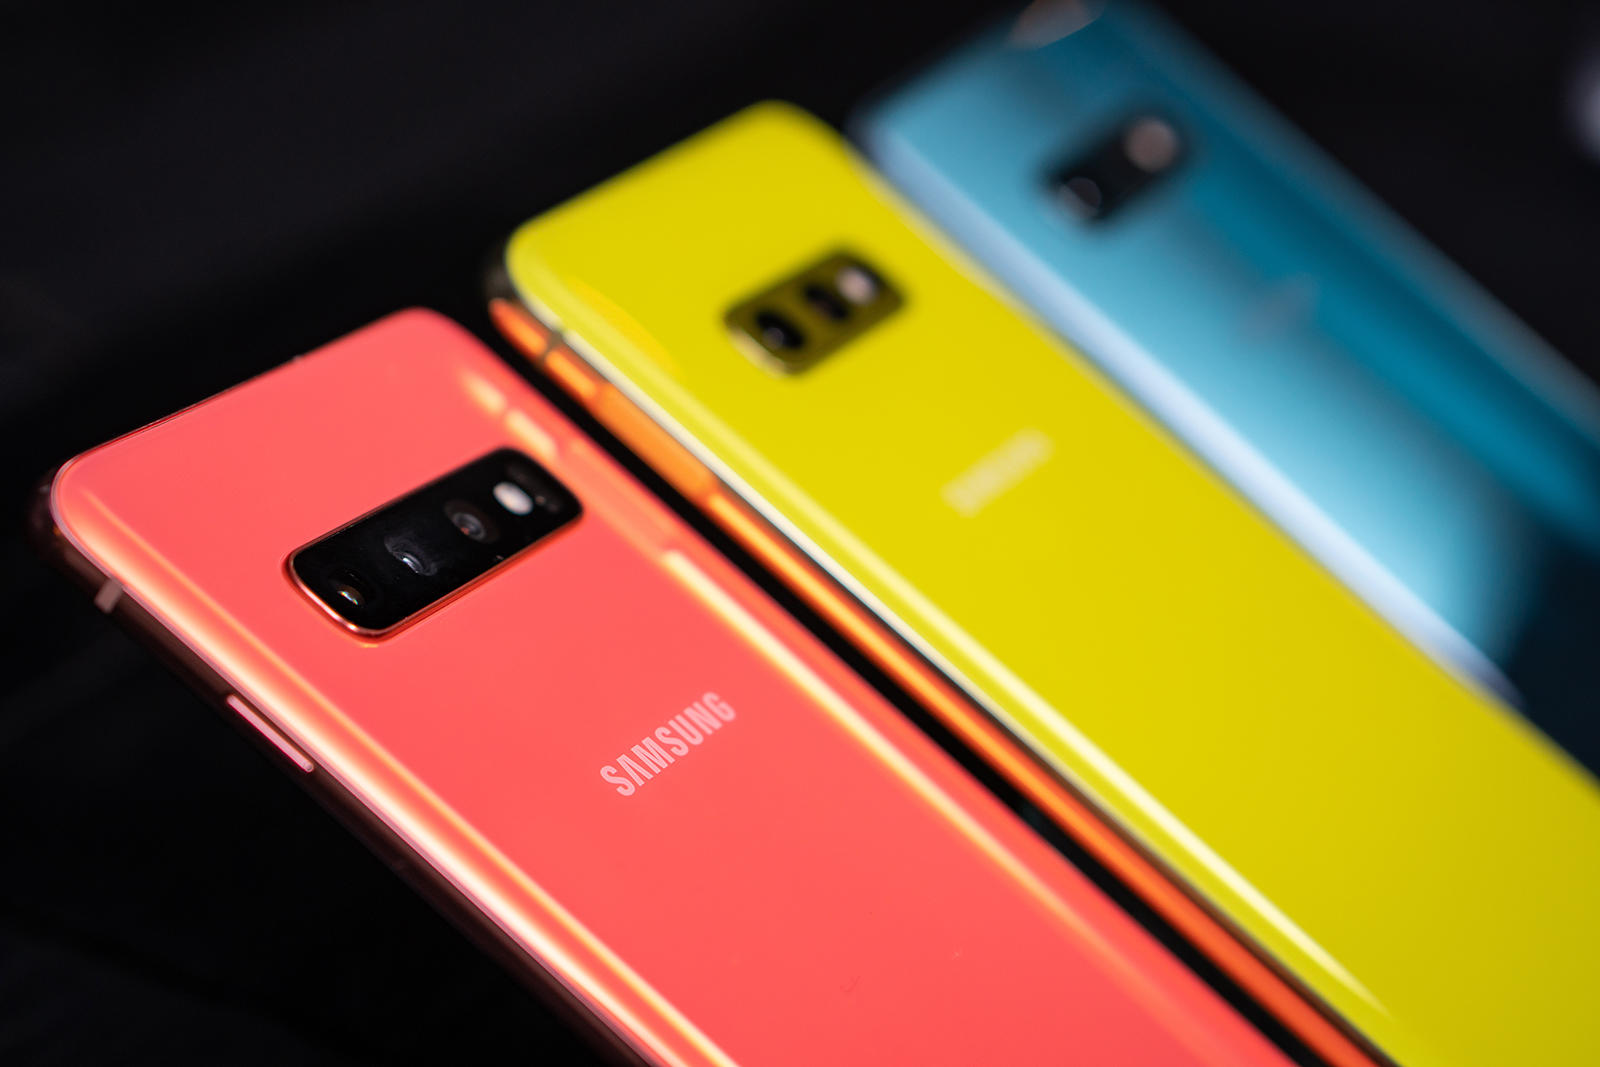 Galaxy S10 Plus review: Long battery life, shareable wireless